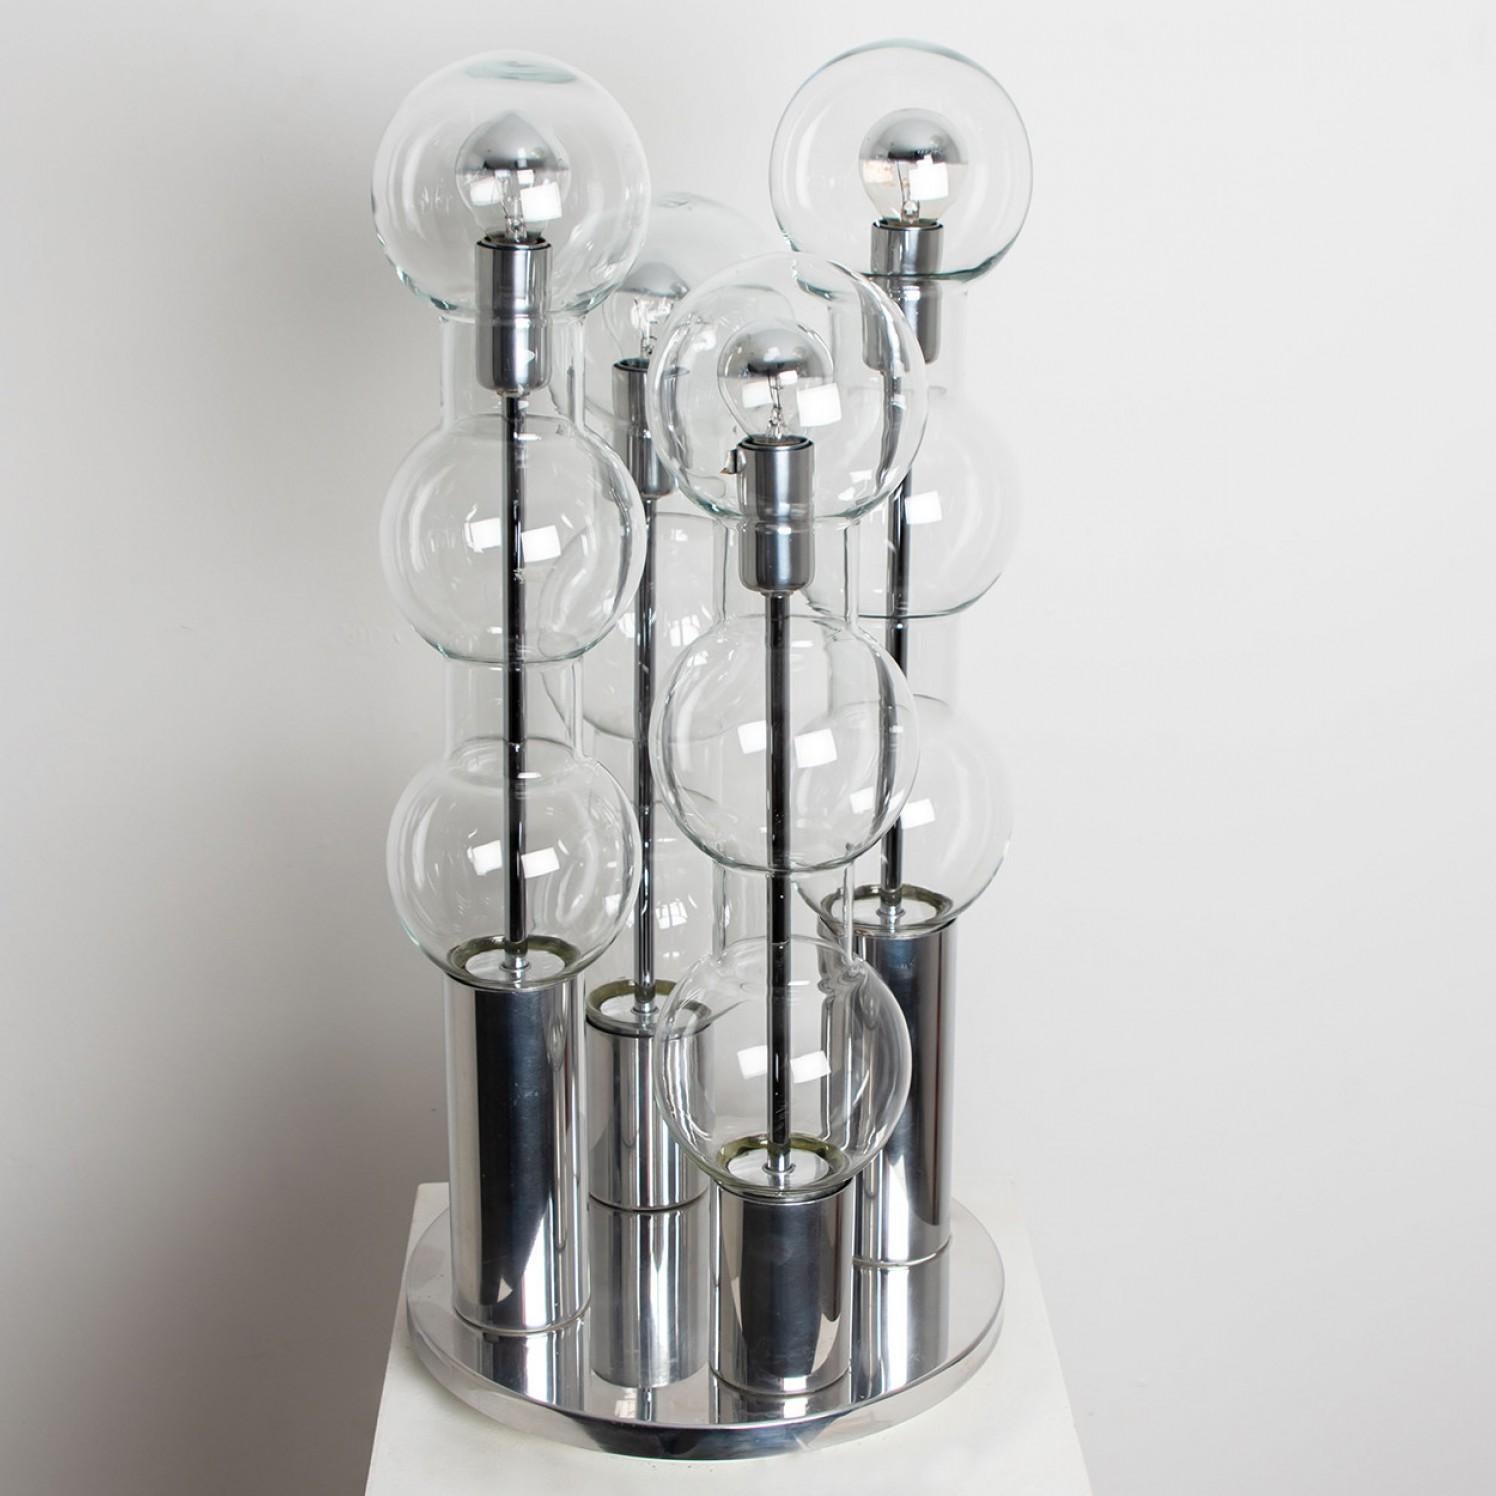 Four Doria hand blown glass bubbled tubes on a chrome base. Manufactured by Doria Leuchten Germany, circa 1970. This exceptional artefact of modern design reflects the extreme interest in modernism across Europe during this period. This unique lamp